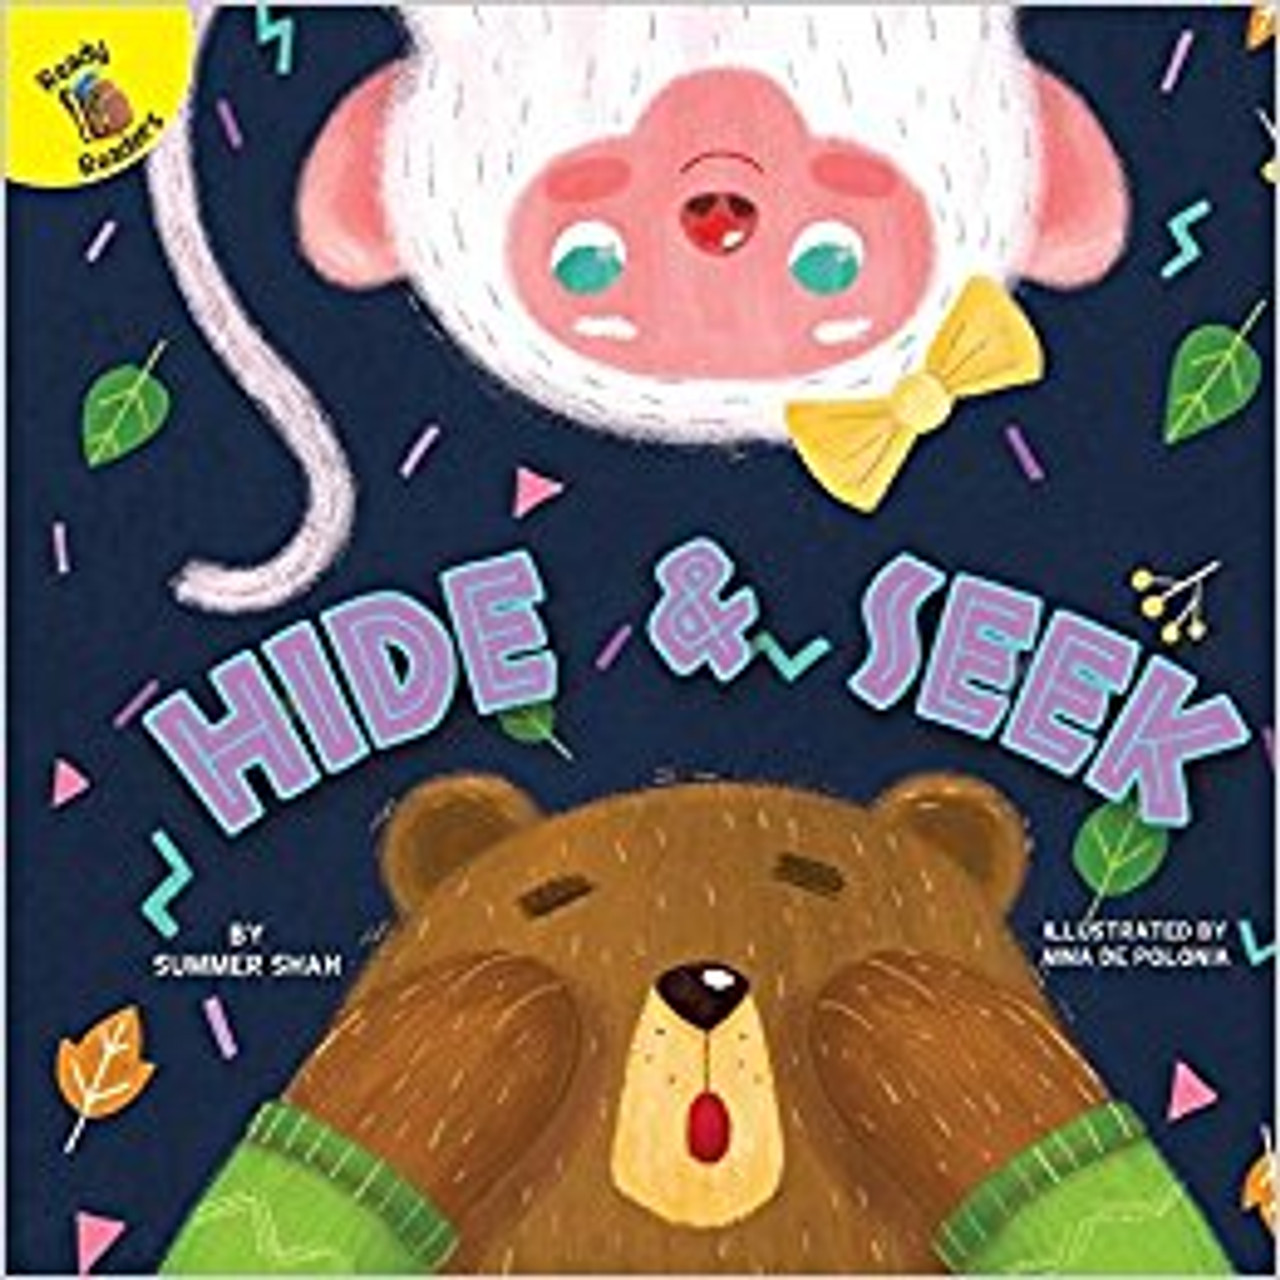 Time to play hide and seek in the playground. Find somewhere to hide before the count hits 10. Where is the best place to hide?